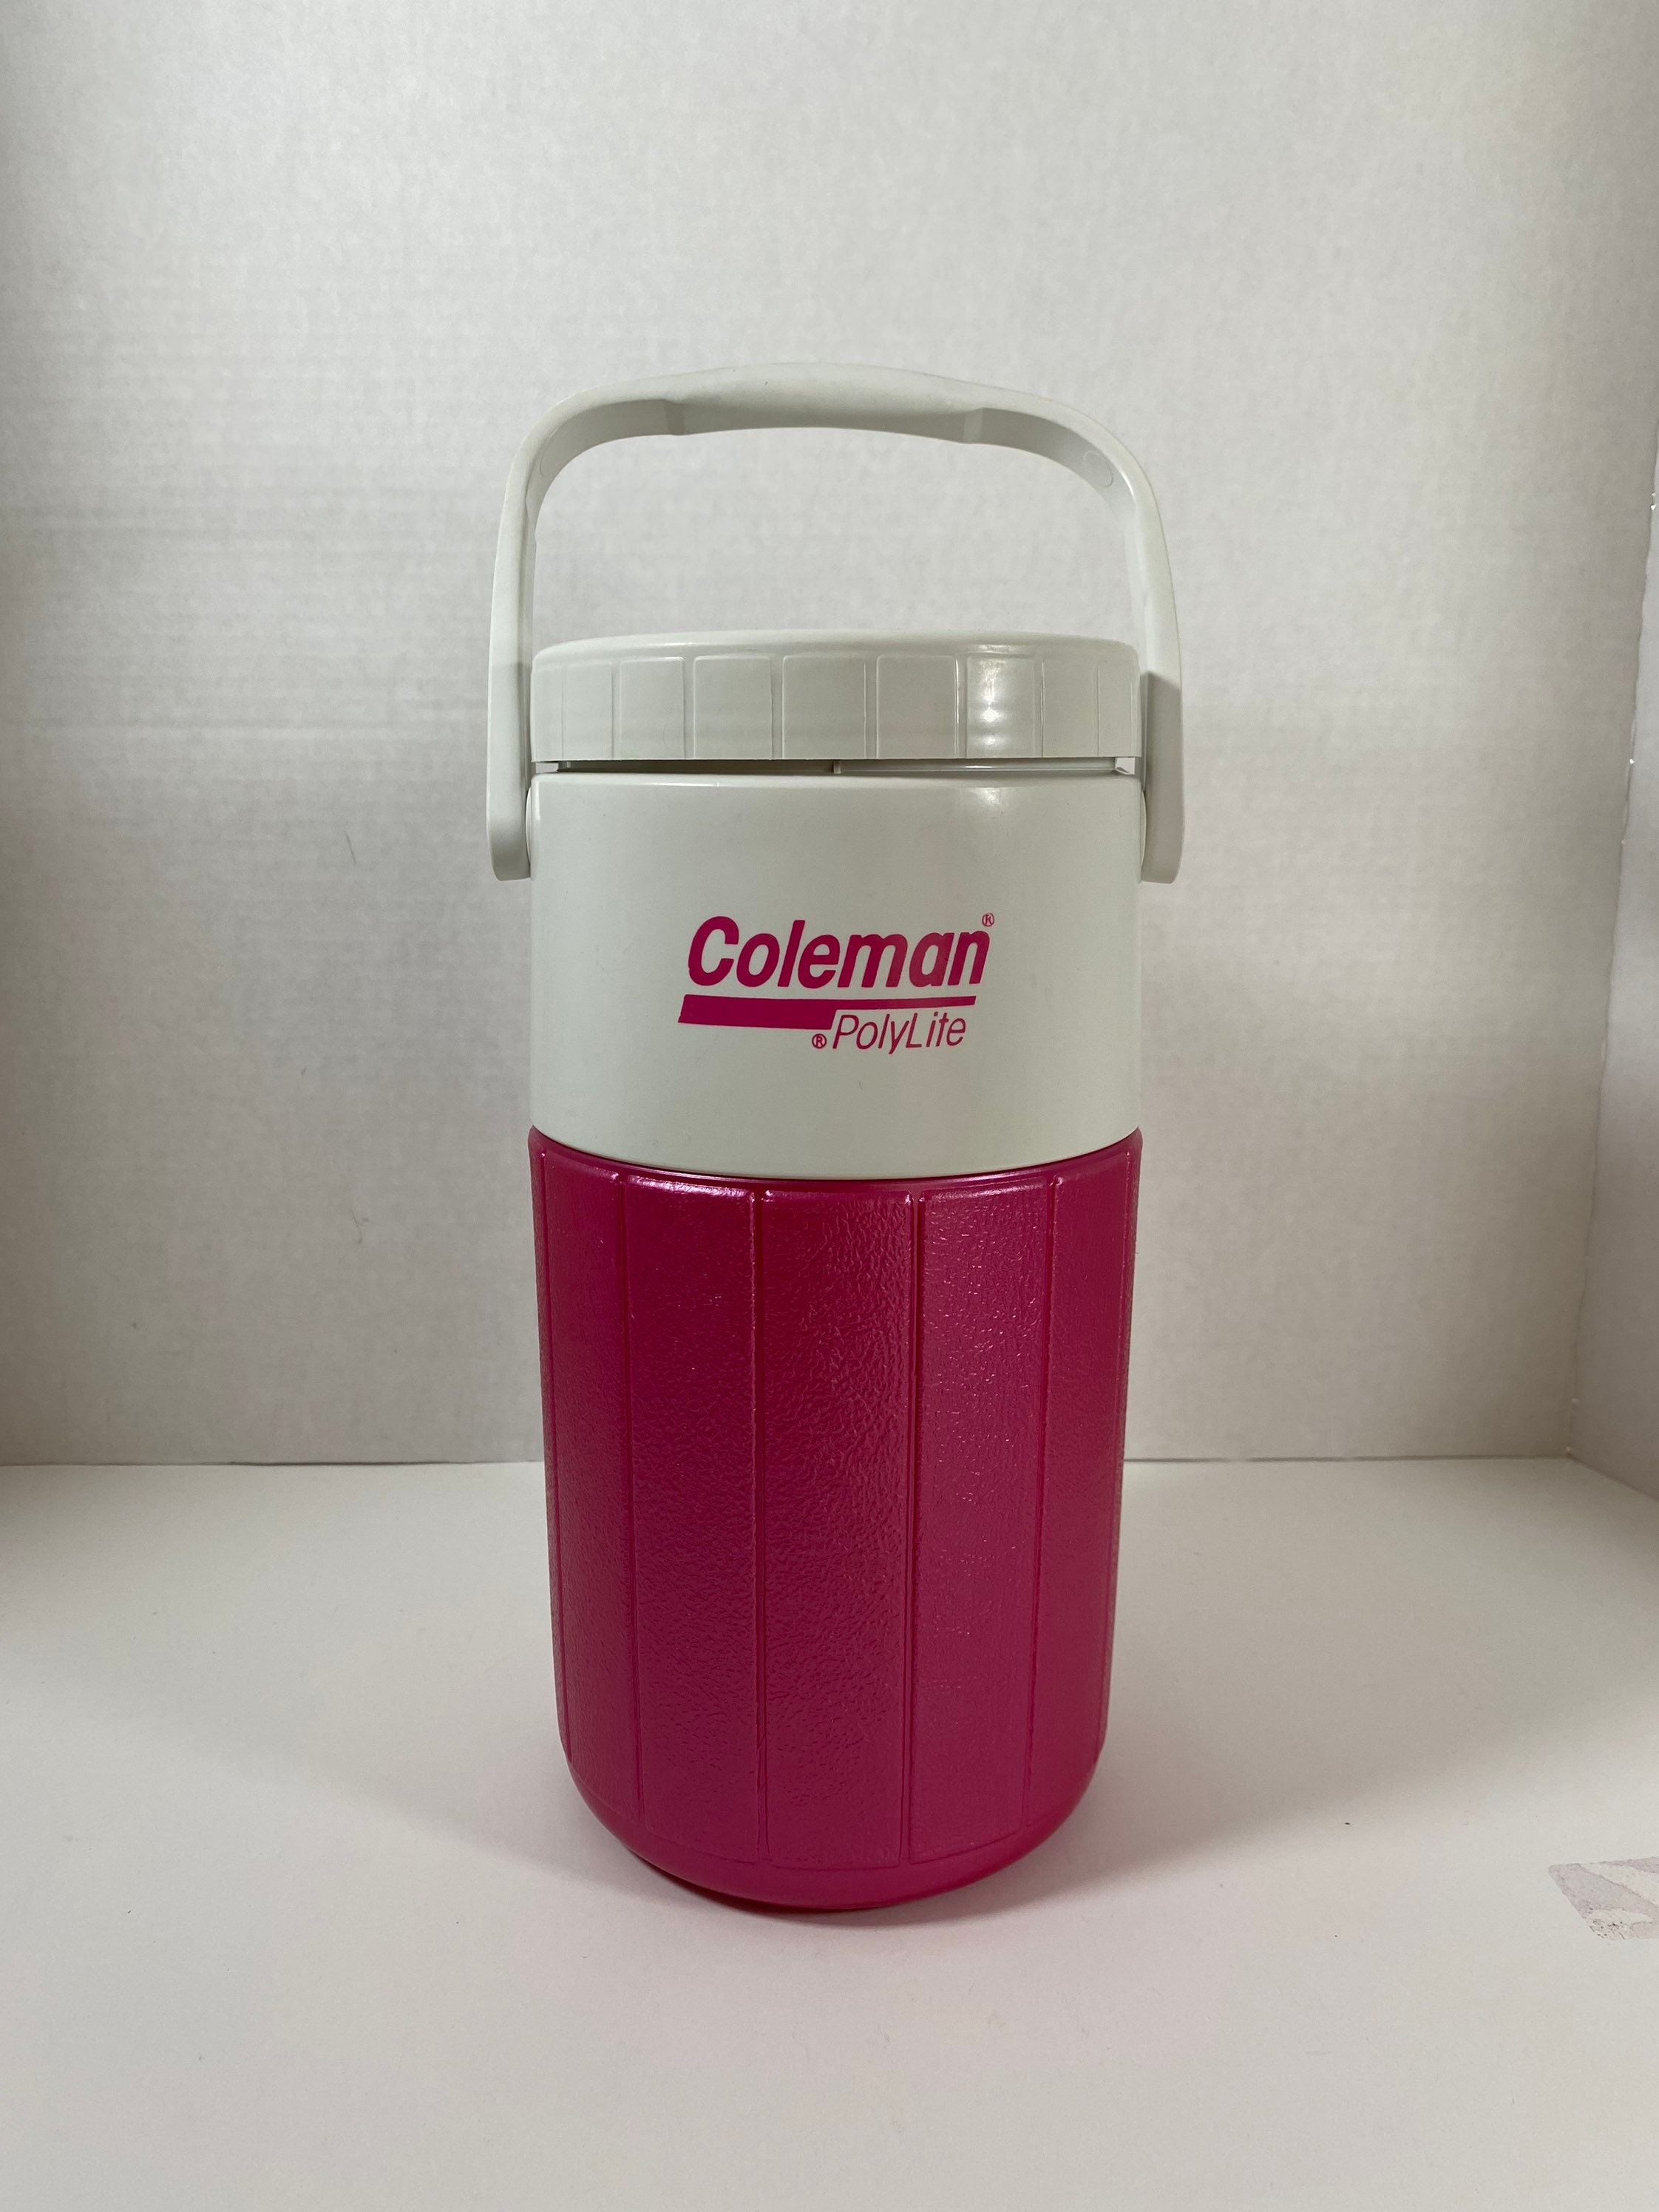 Coleman Ice World 2000 Cooler Vintage Pink Fuchsia 1989 Made in Germany  Kuhlbox